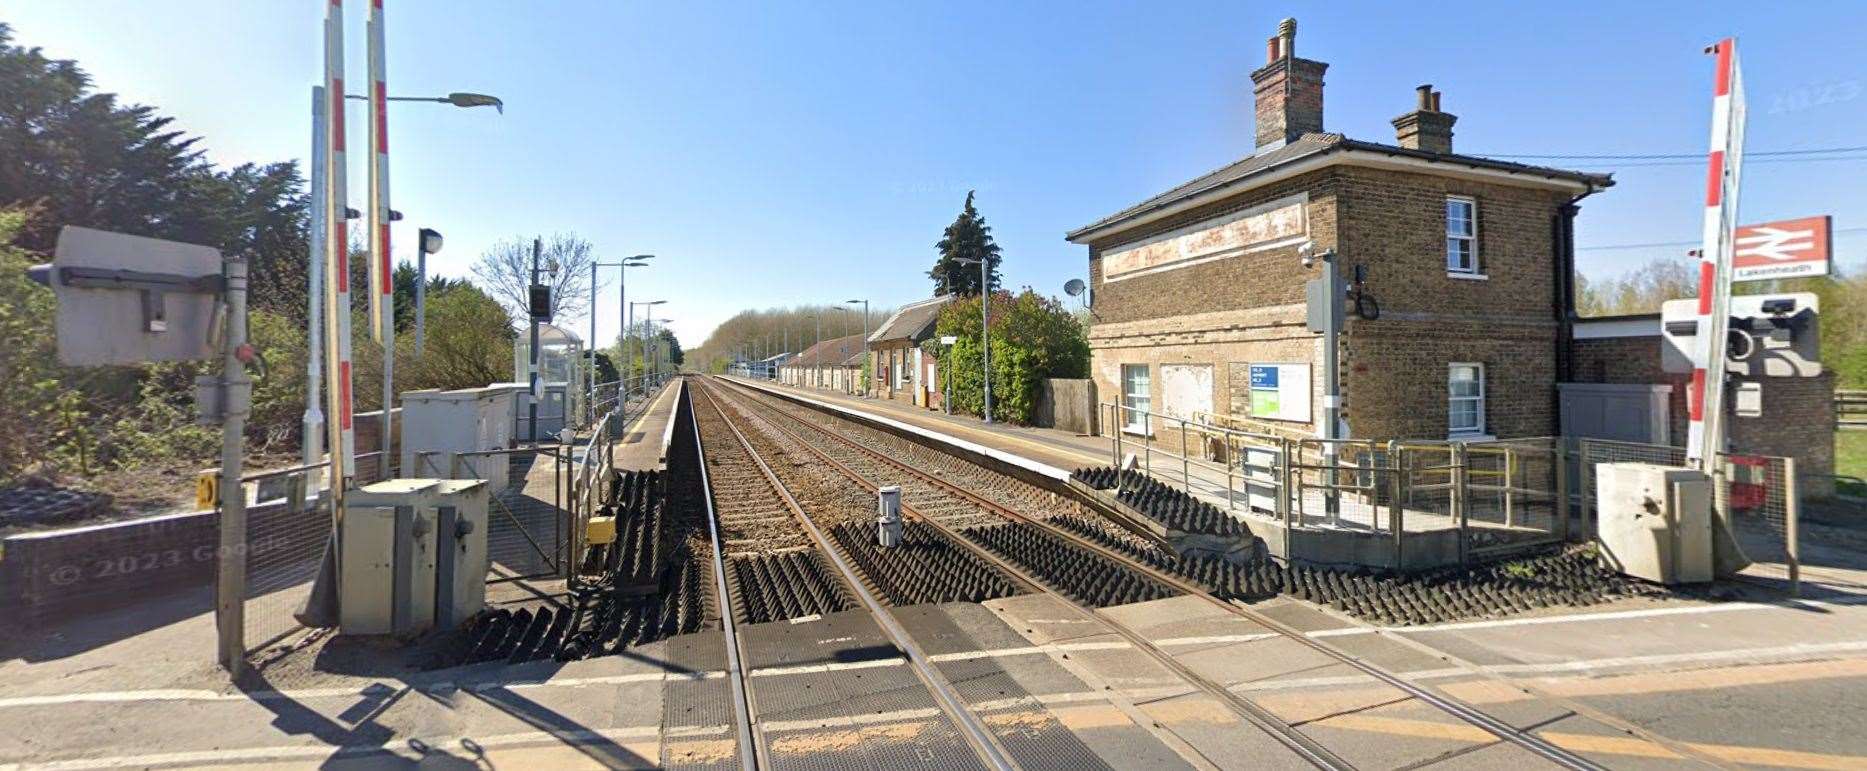 Lakenheath is the least used station in Suffolk, with 562 entries and exits in the last period. Picture: Google Maps